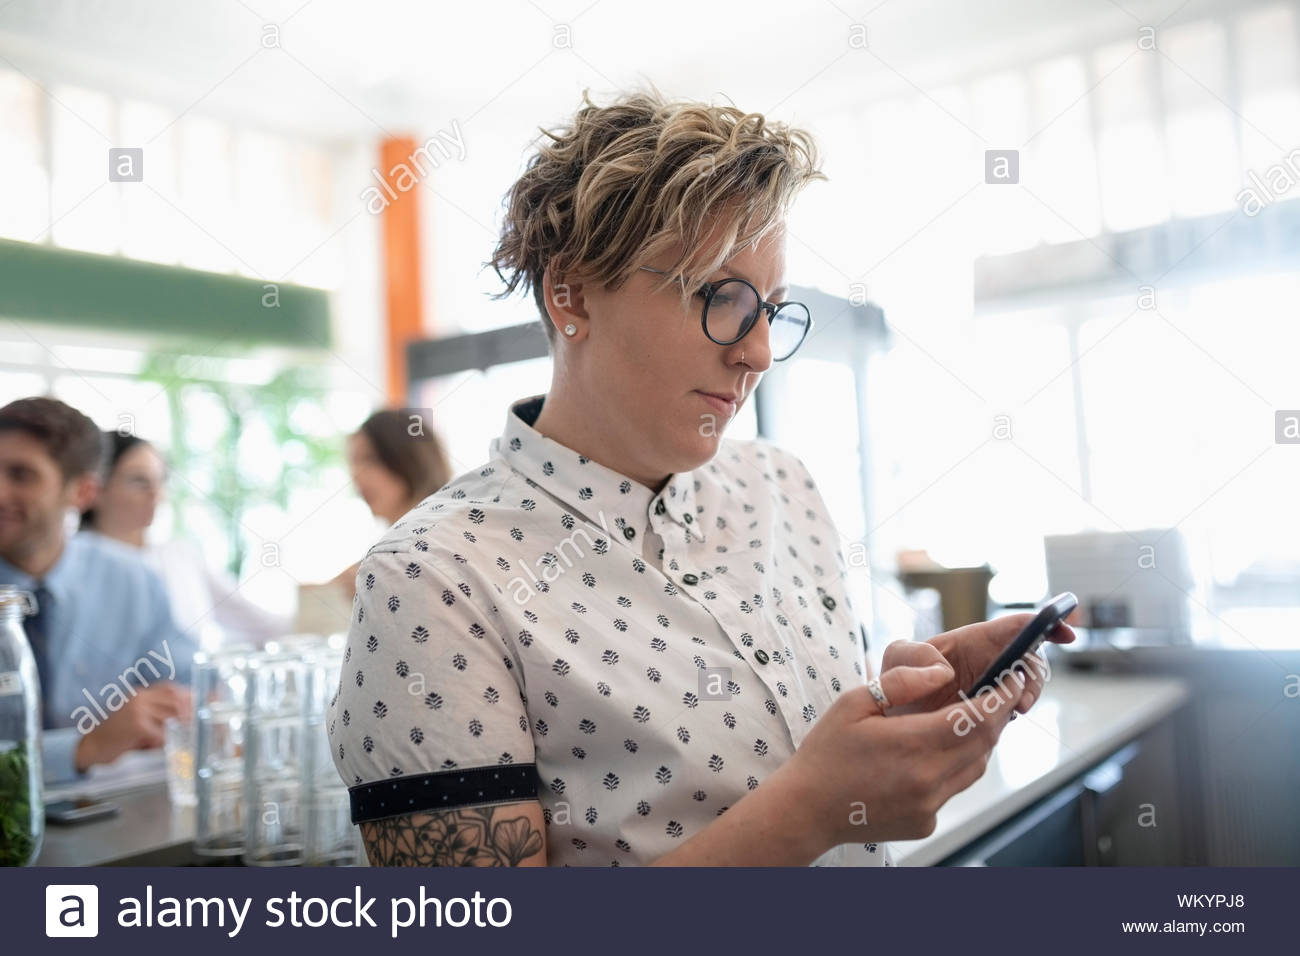 Small business owner using cell phone in restaurant Stock Photo